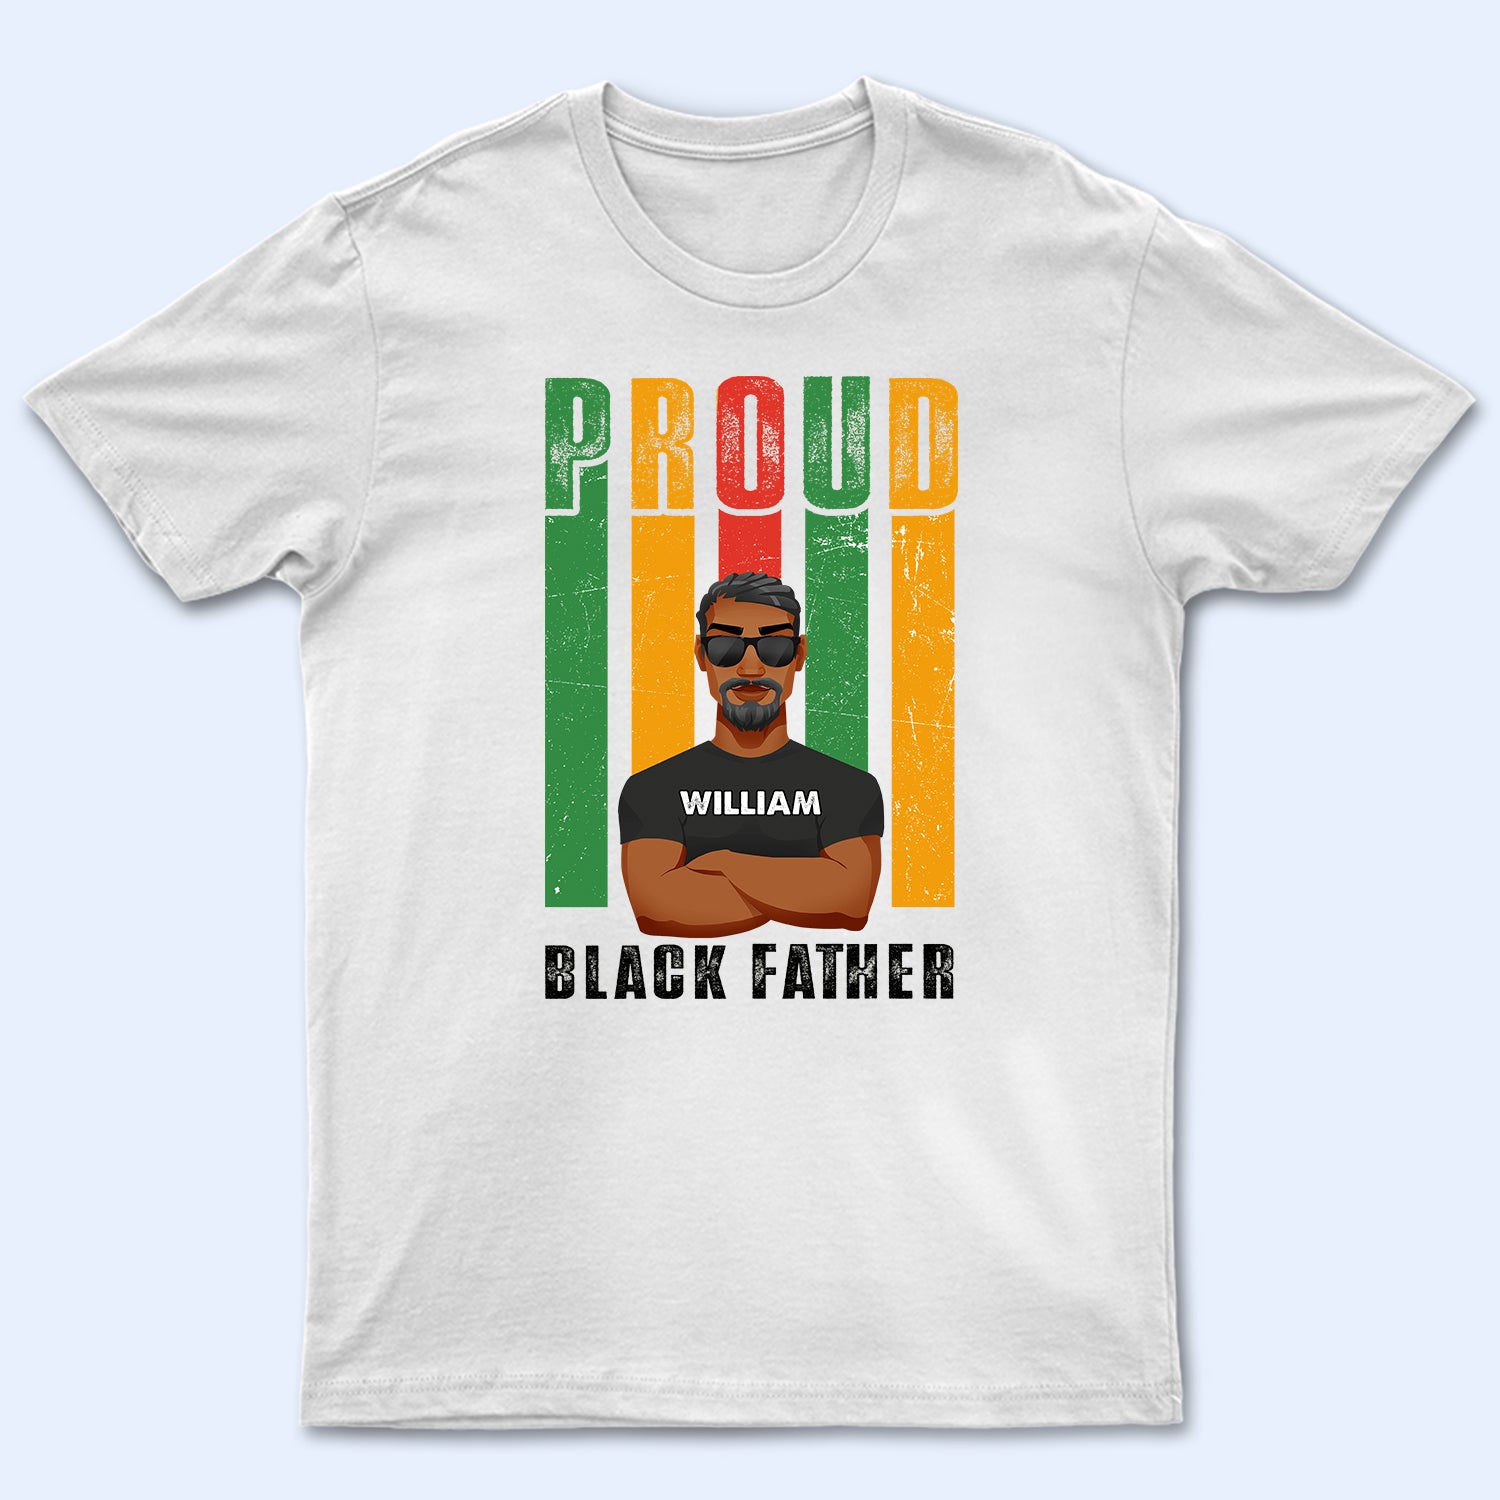 Proud Black Father - Best Gift For Dad - Personalized T Shirt